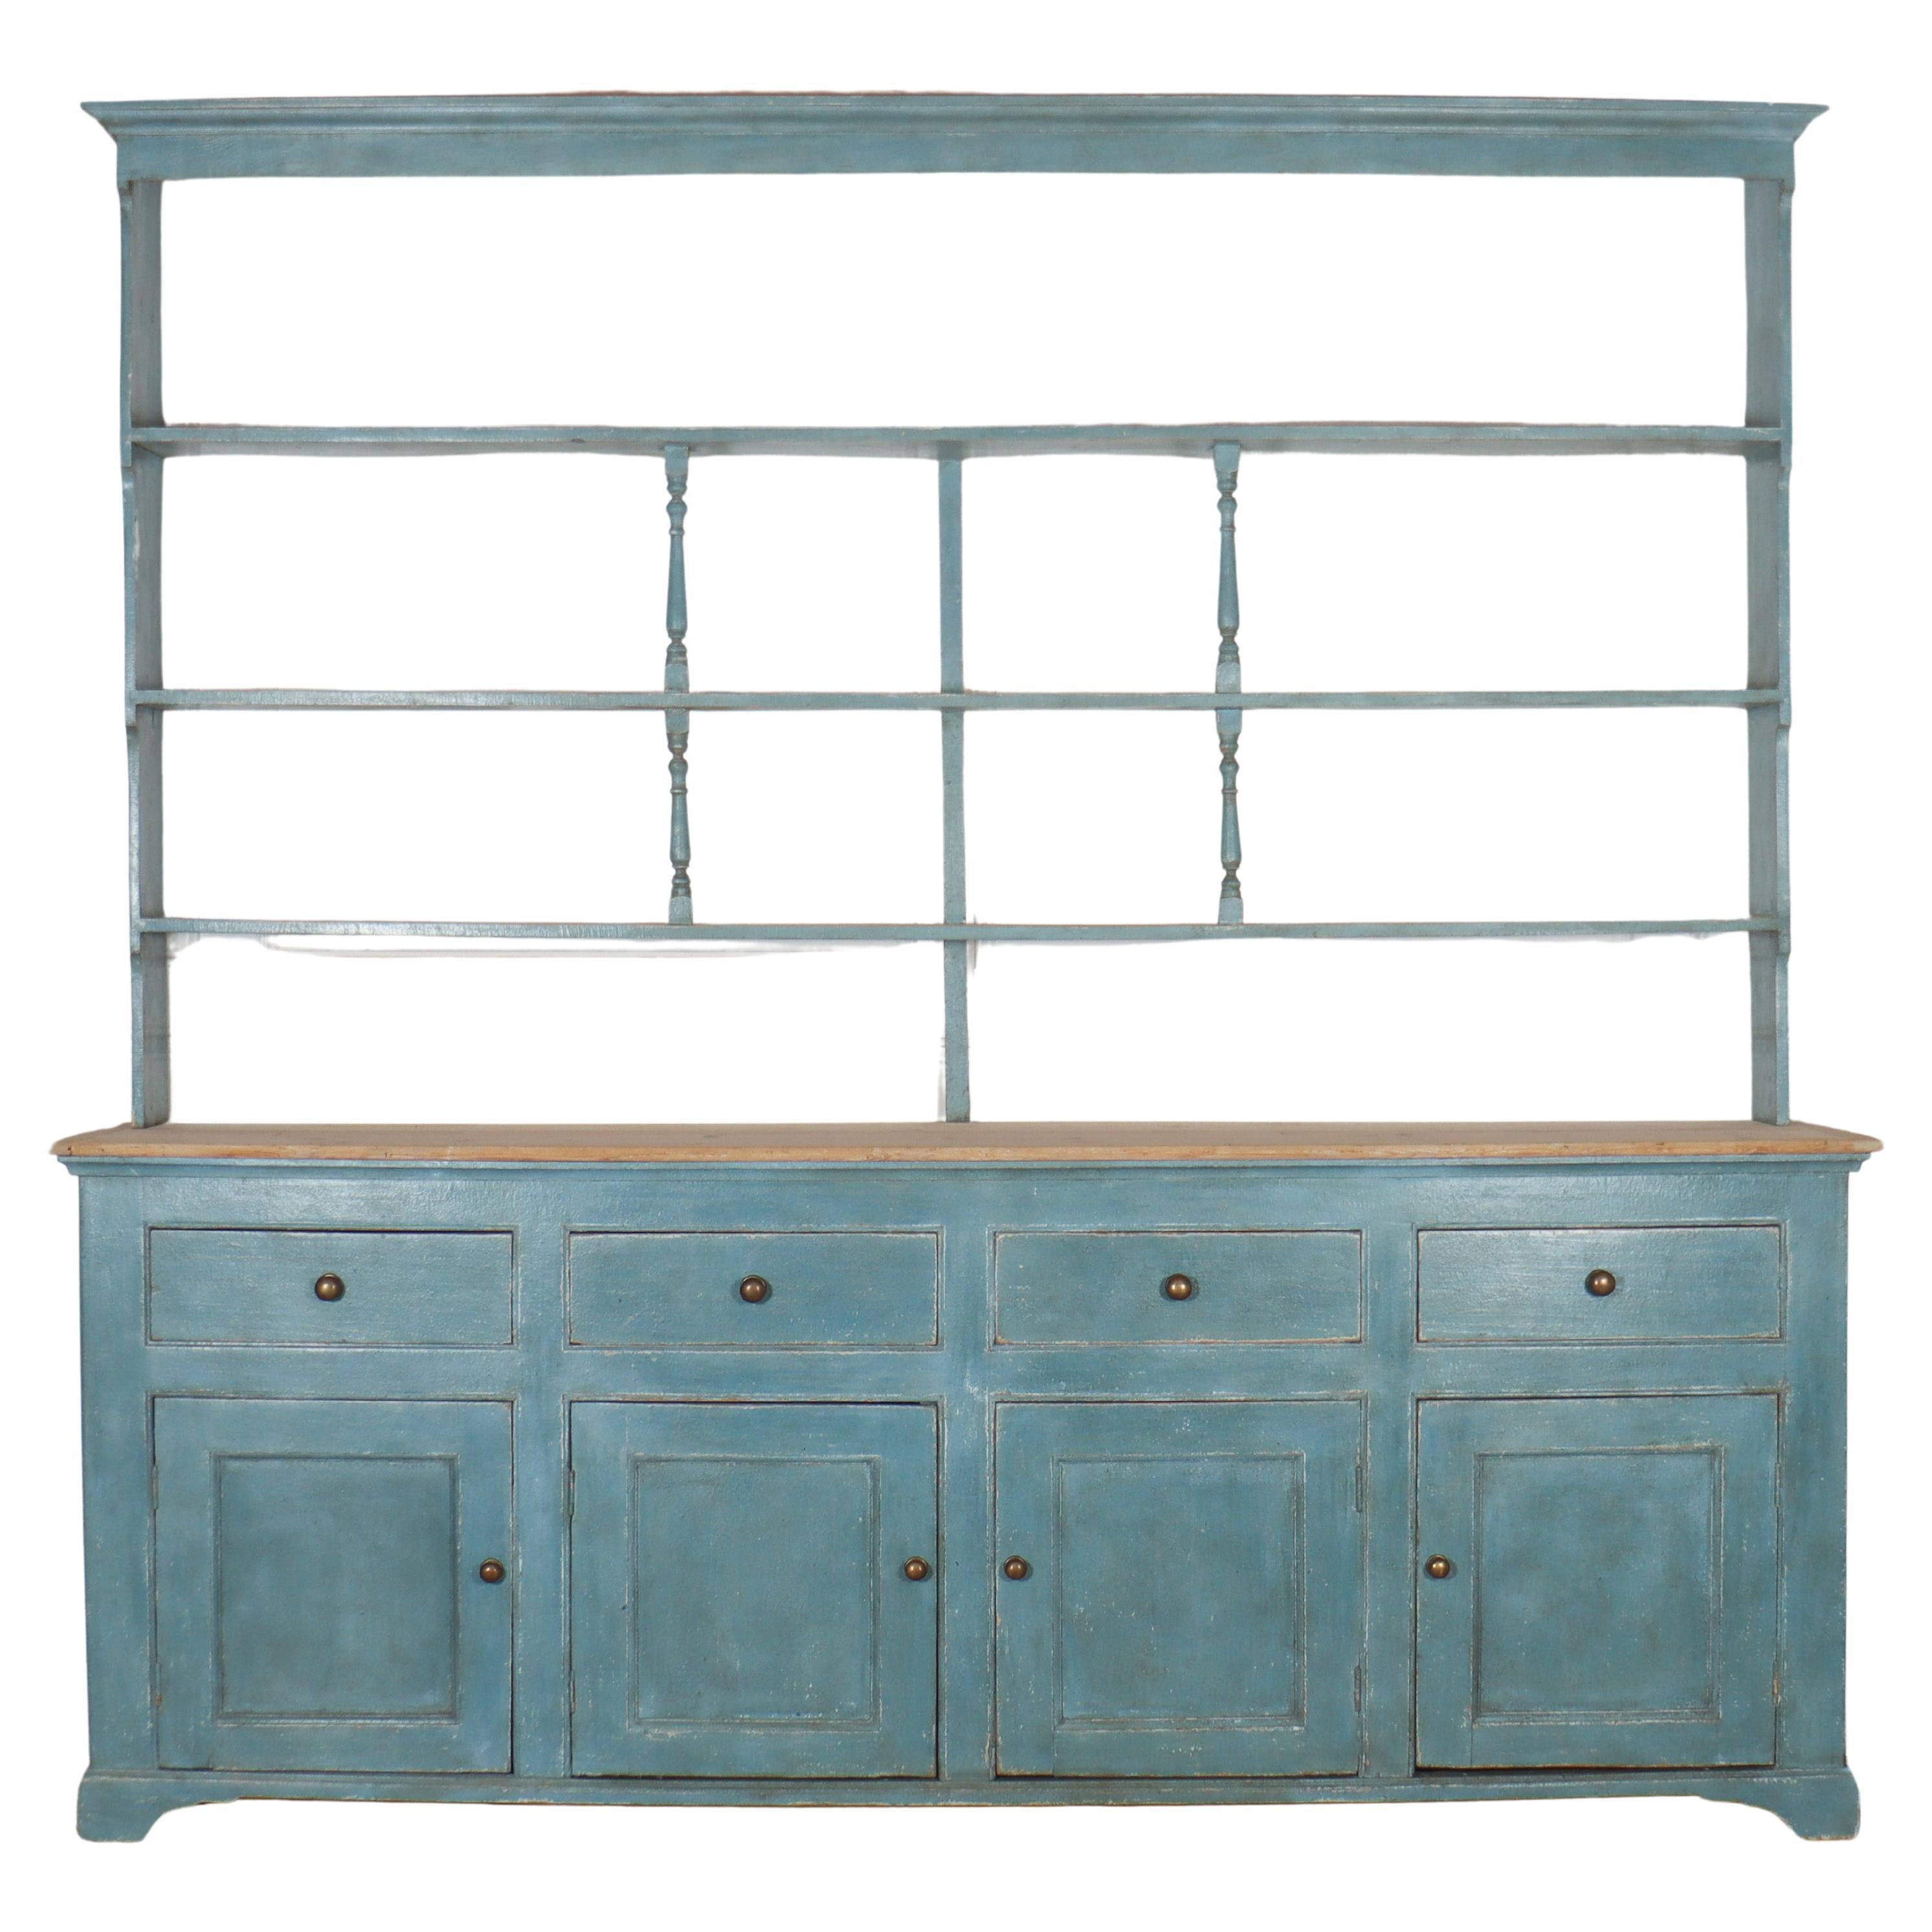 English Country House Dresser For Sale